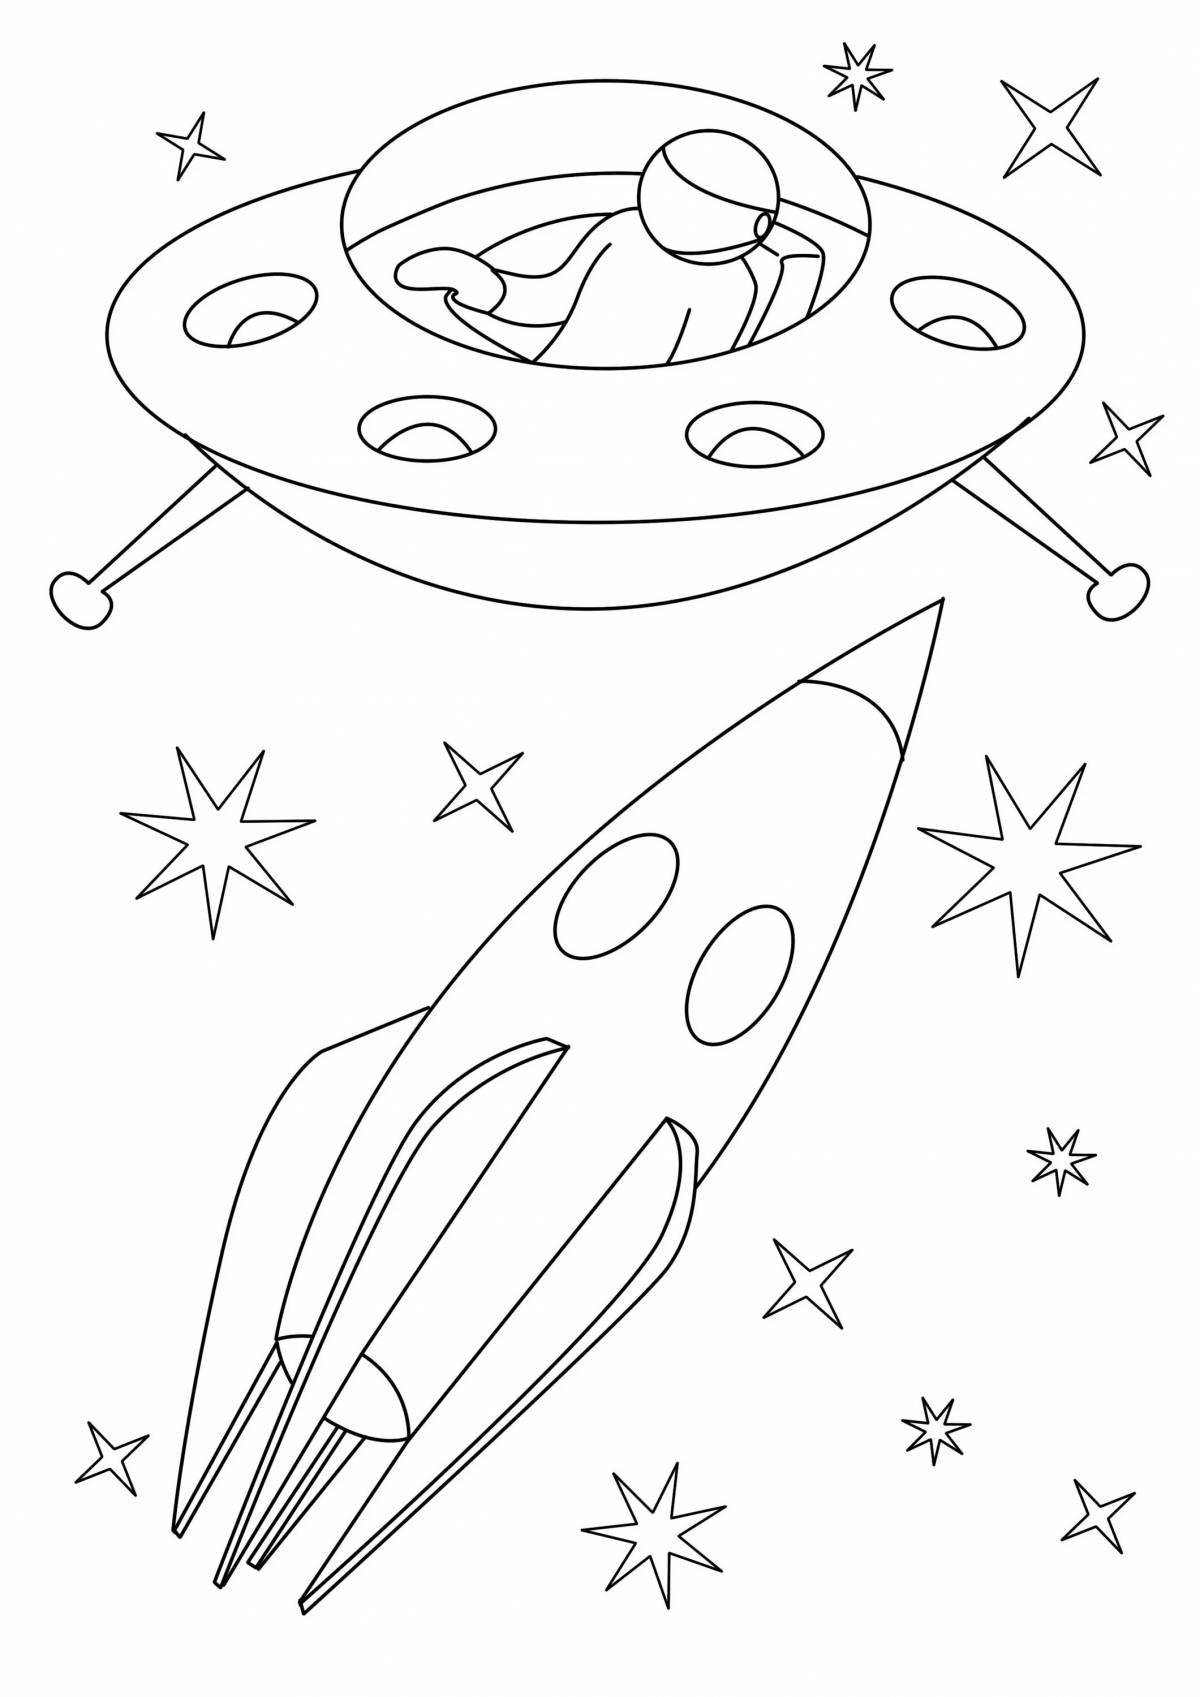 Adorable rocket coloring book for 3-4 year olds